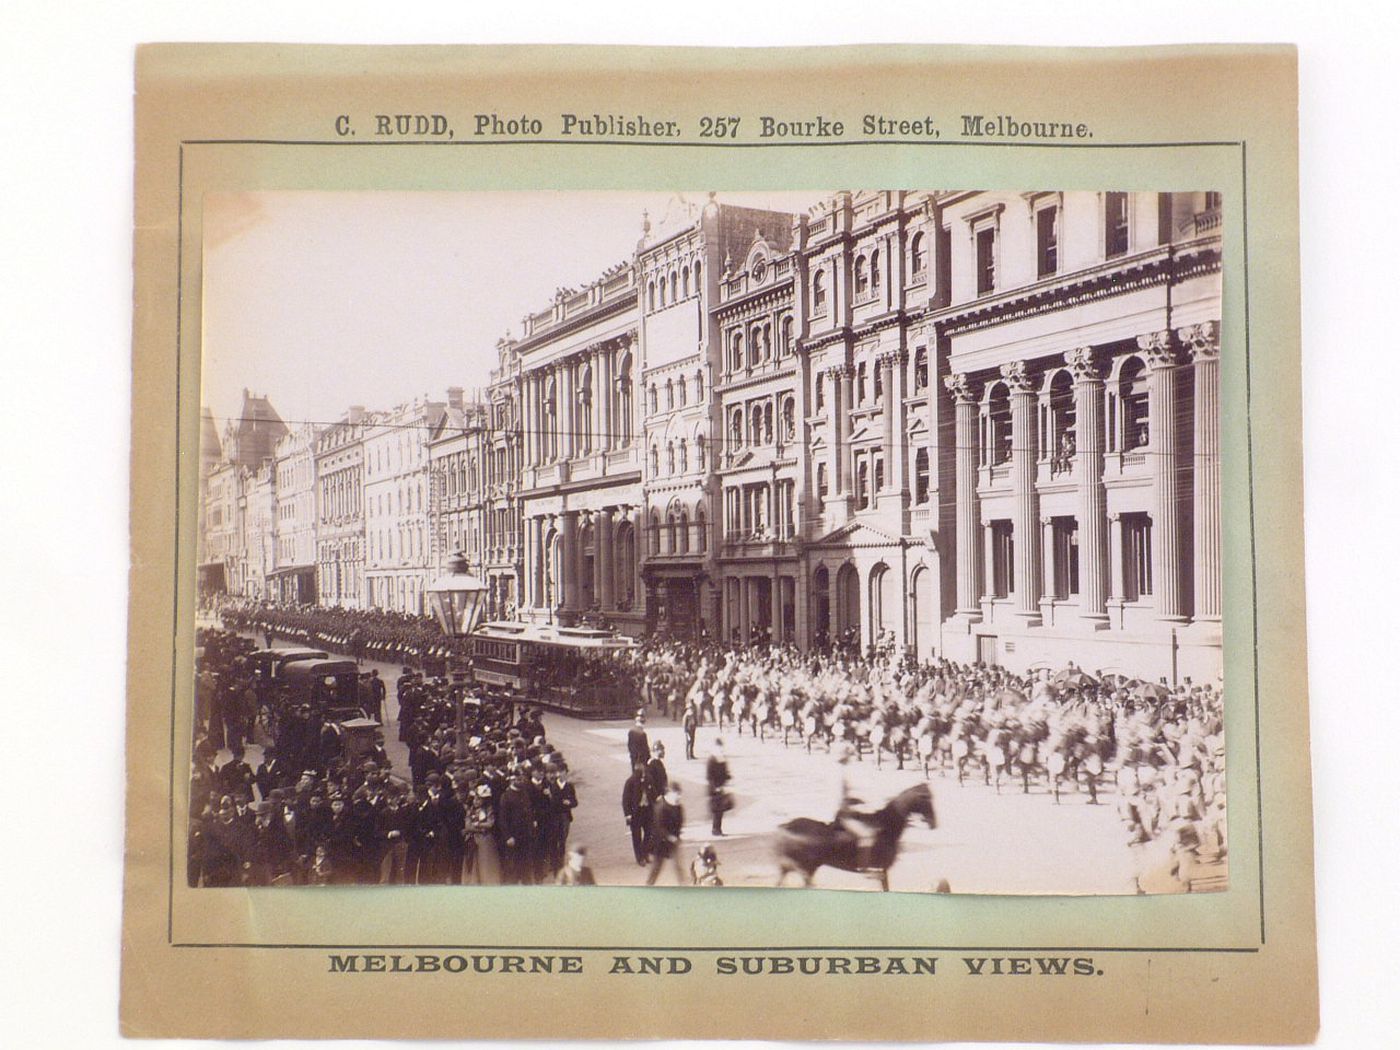 View of a parade showing a marching band, Melbourne [?], Australia